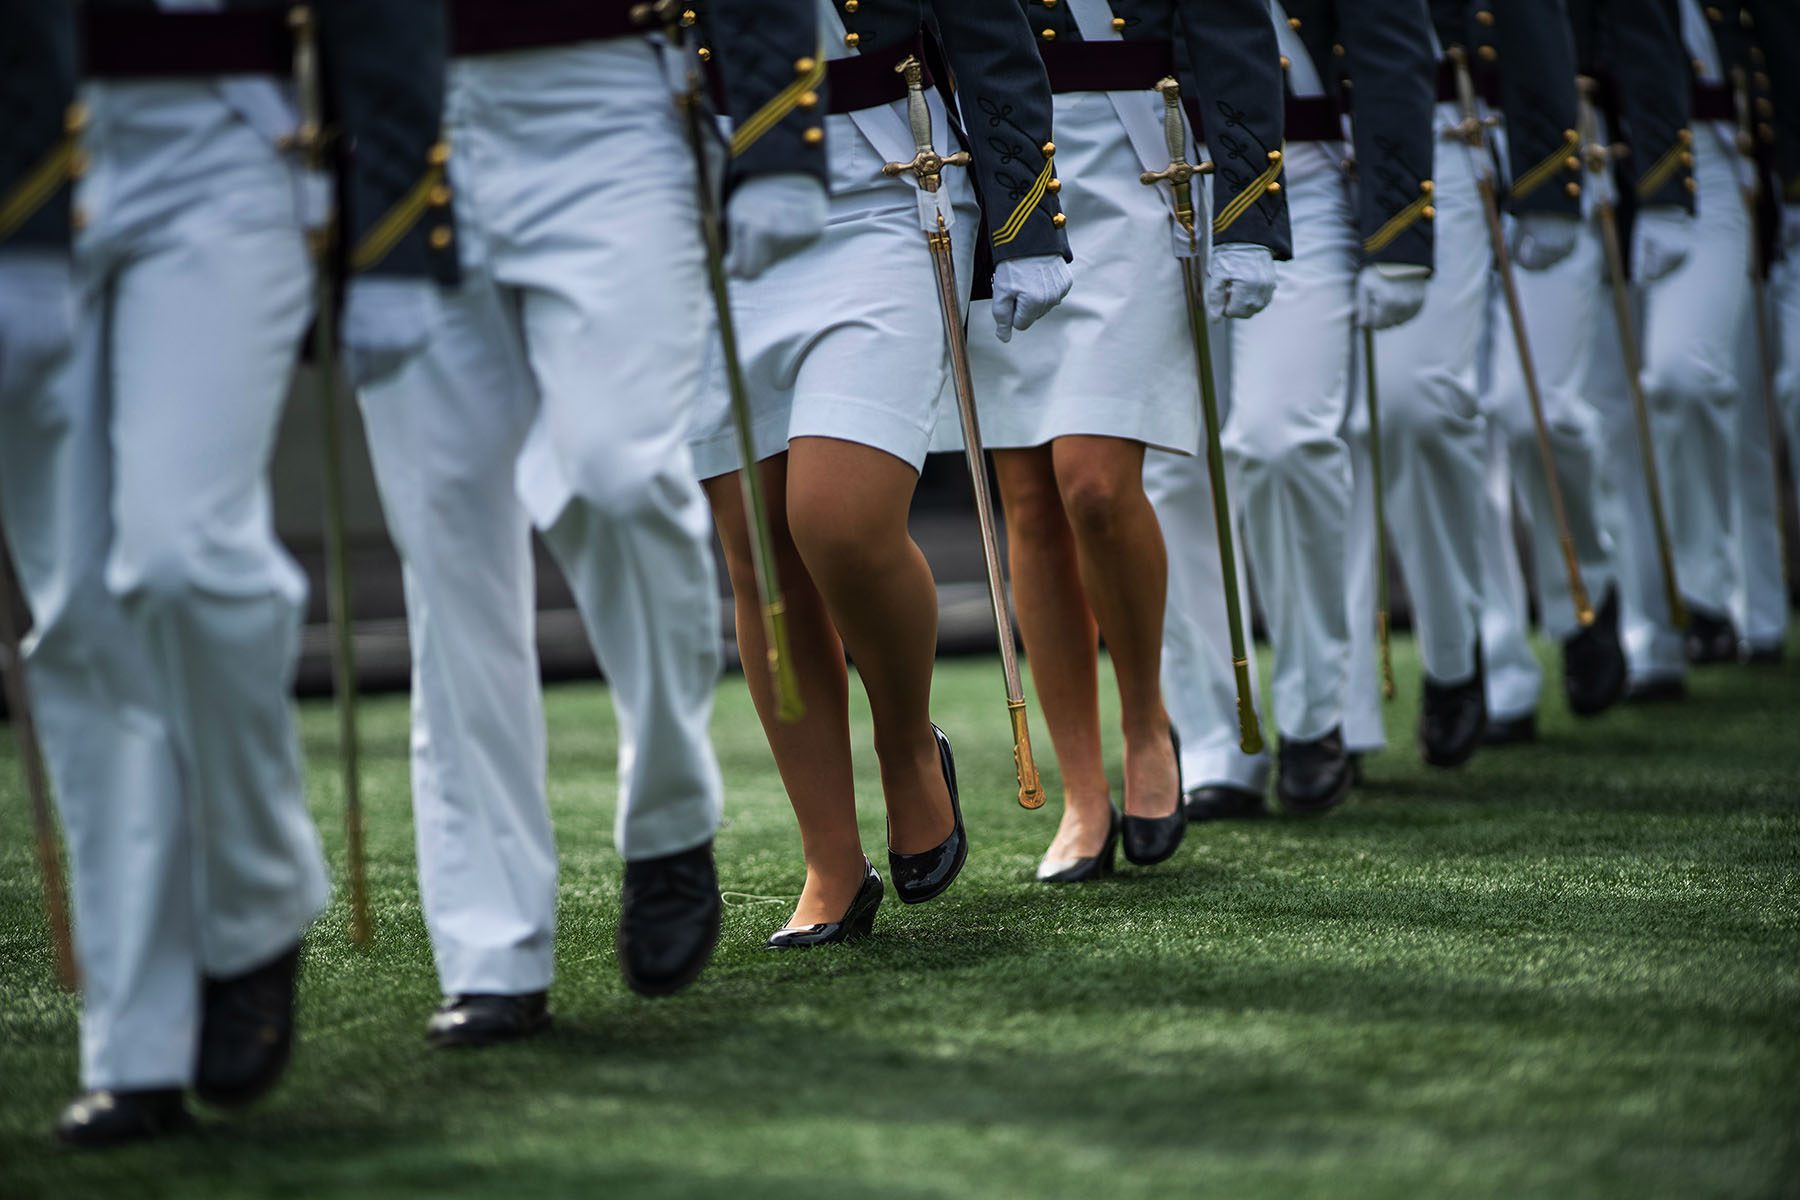 Military Academy cadets, some wearing skirts and pumps, some wearing pants, march to their graduation ceremony.